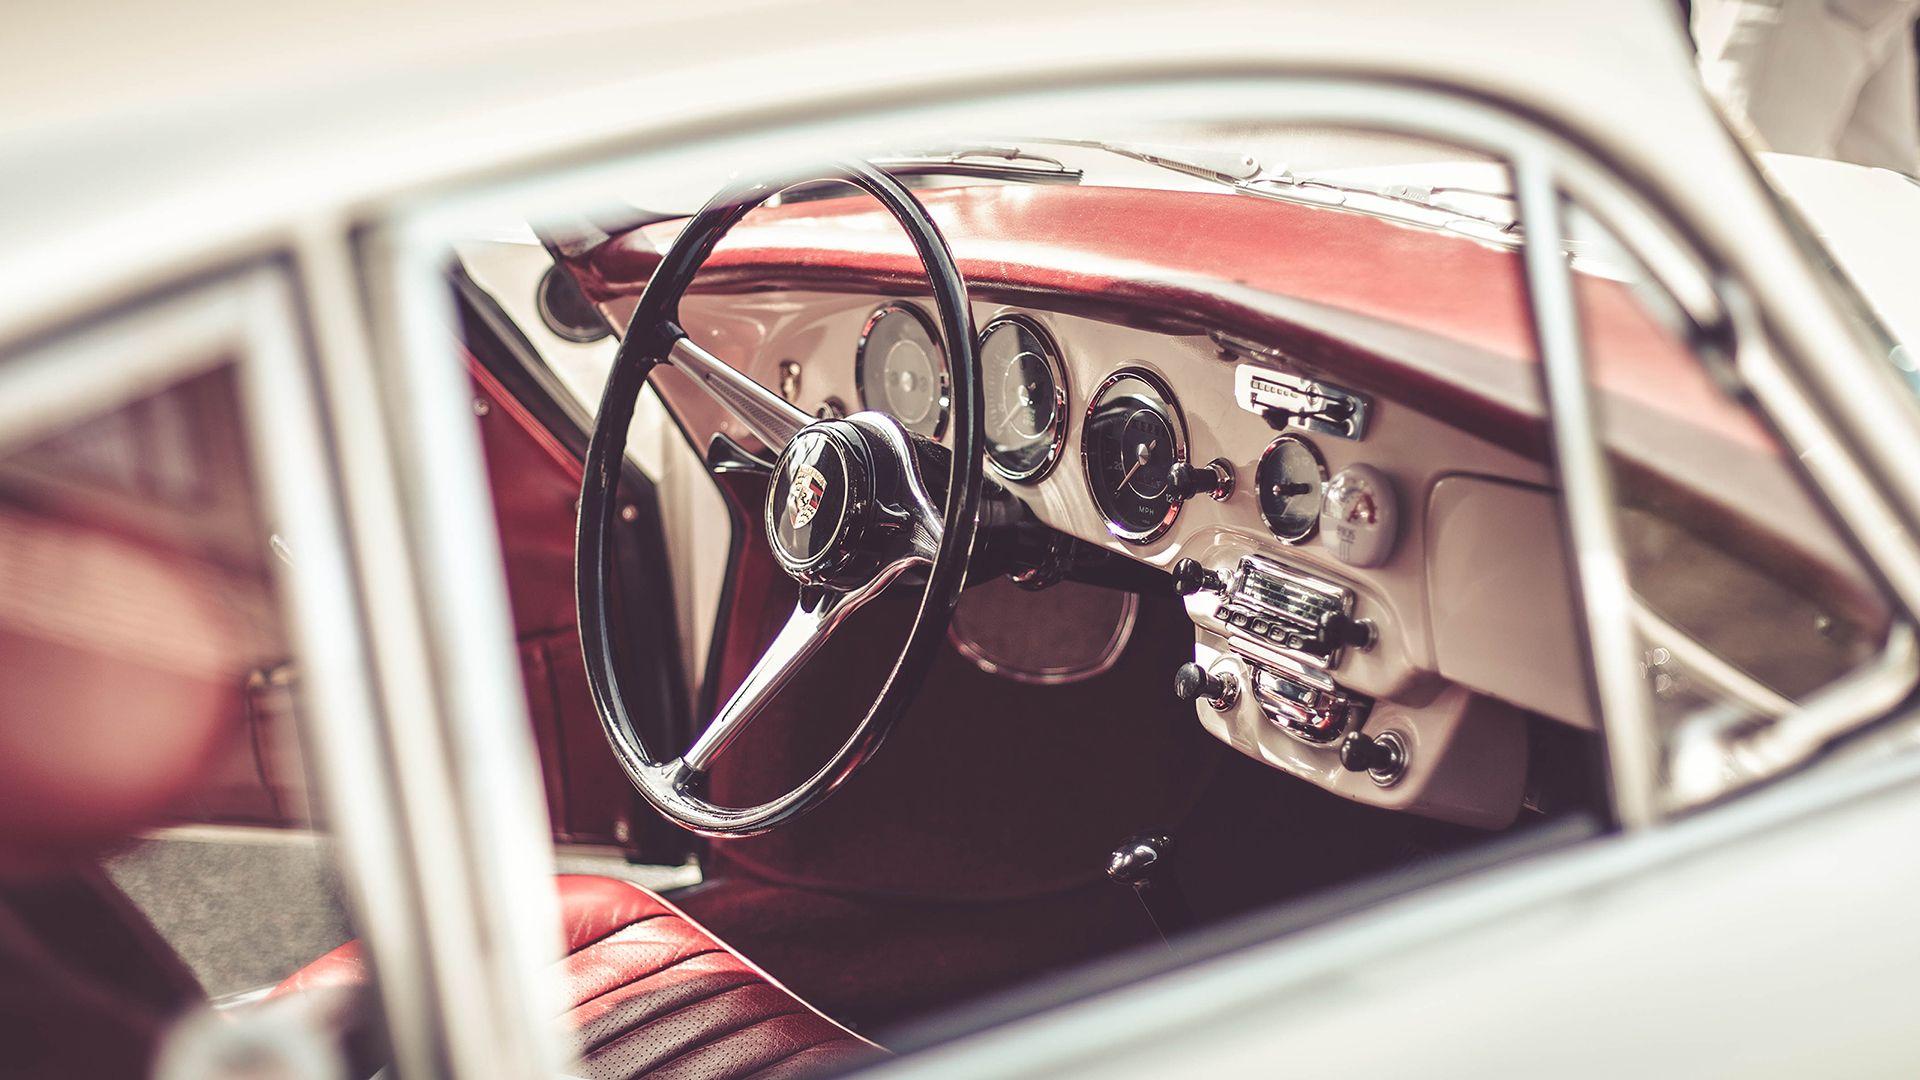 Awesome Car Interior Wallpaper 4038 1920 x 1080